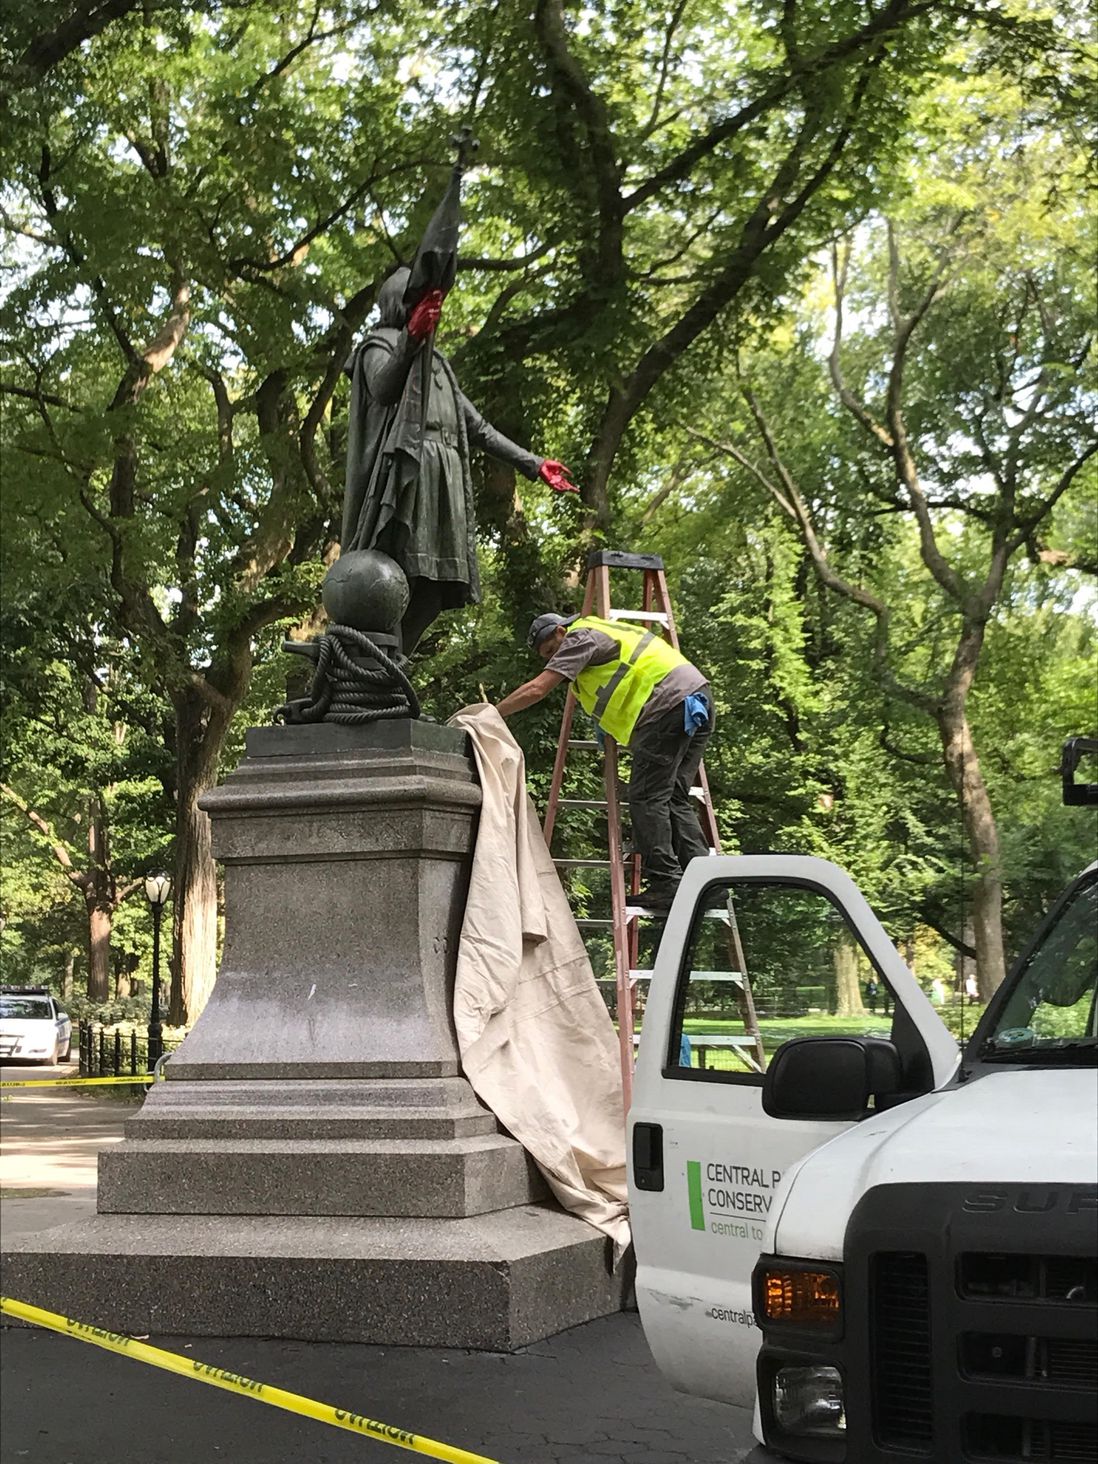 The statue is now being covered (Danielle Barnes / DNAinfo)